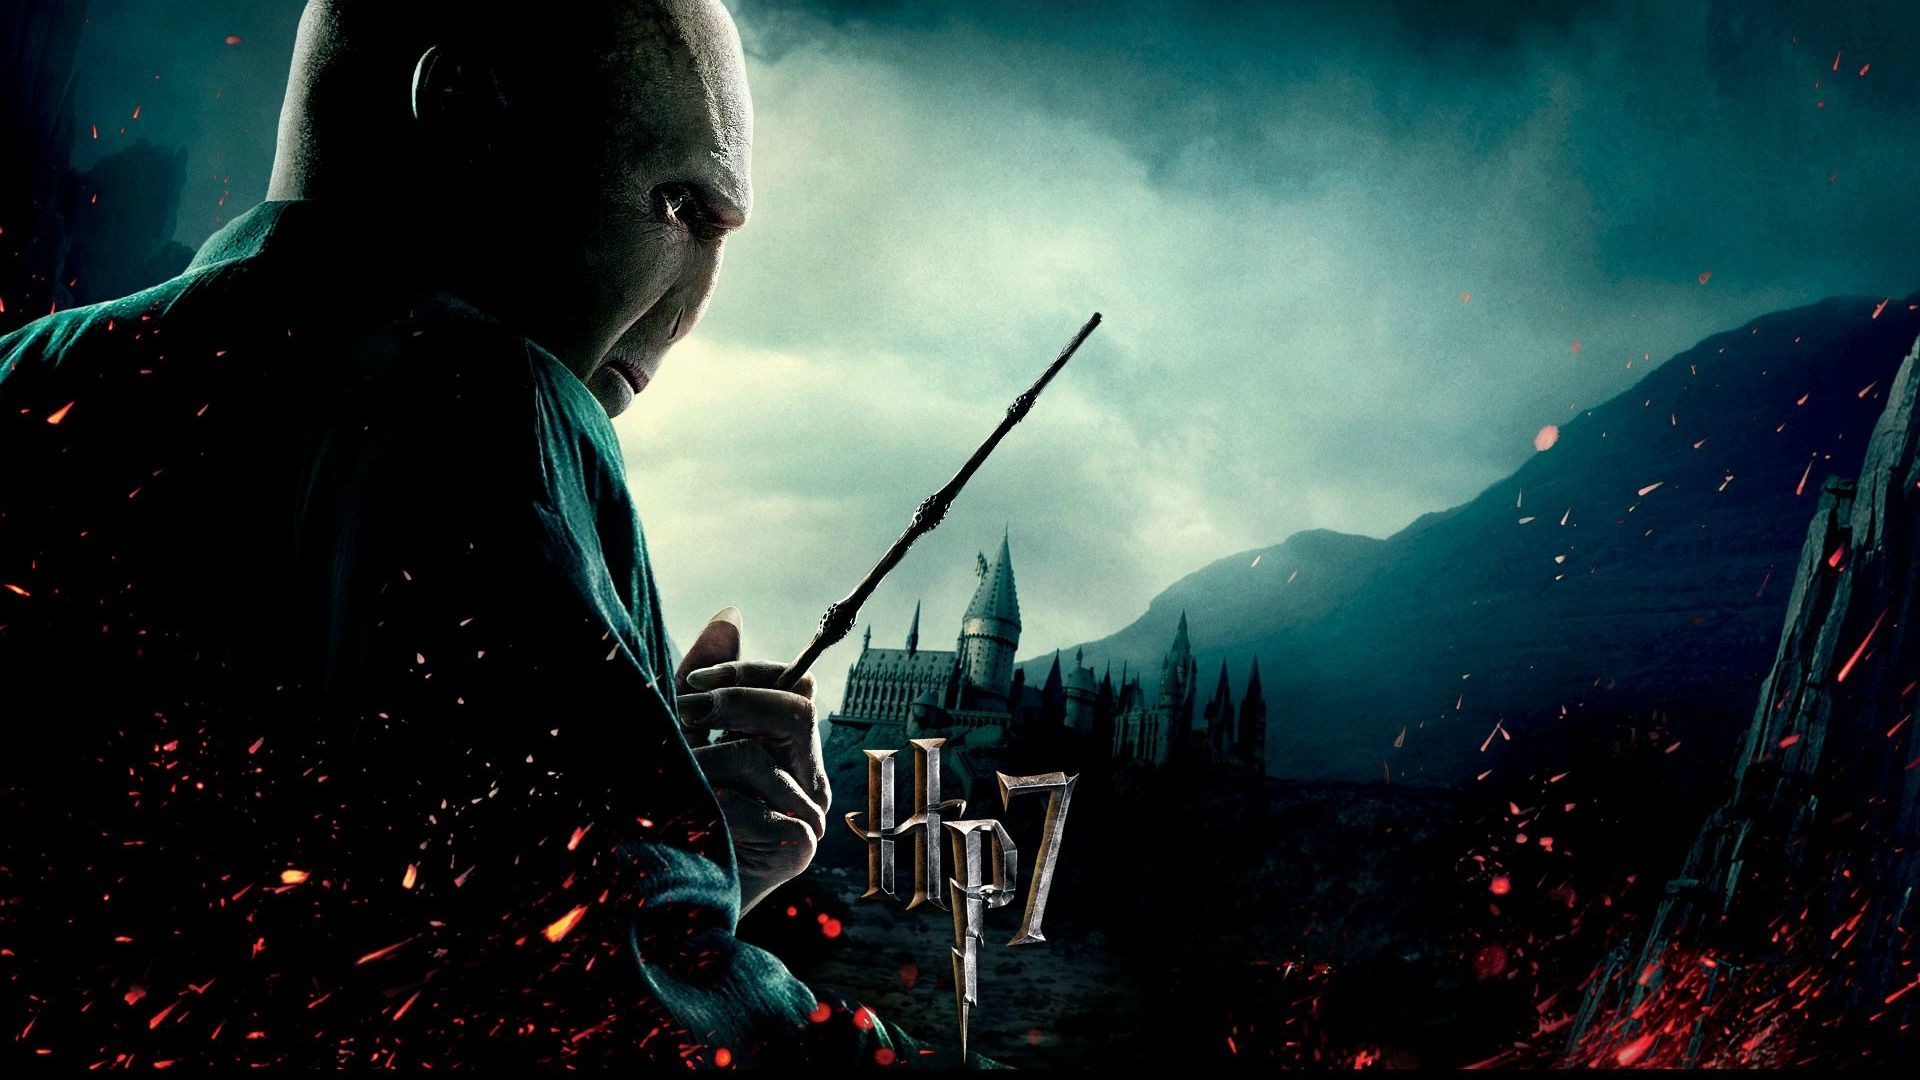 1920x1080 Movie - Harry Potter and the Deathly Hallows: Part 1 Lord Voldemort  Wallpaper